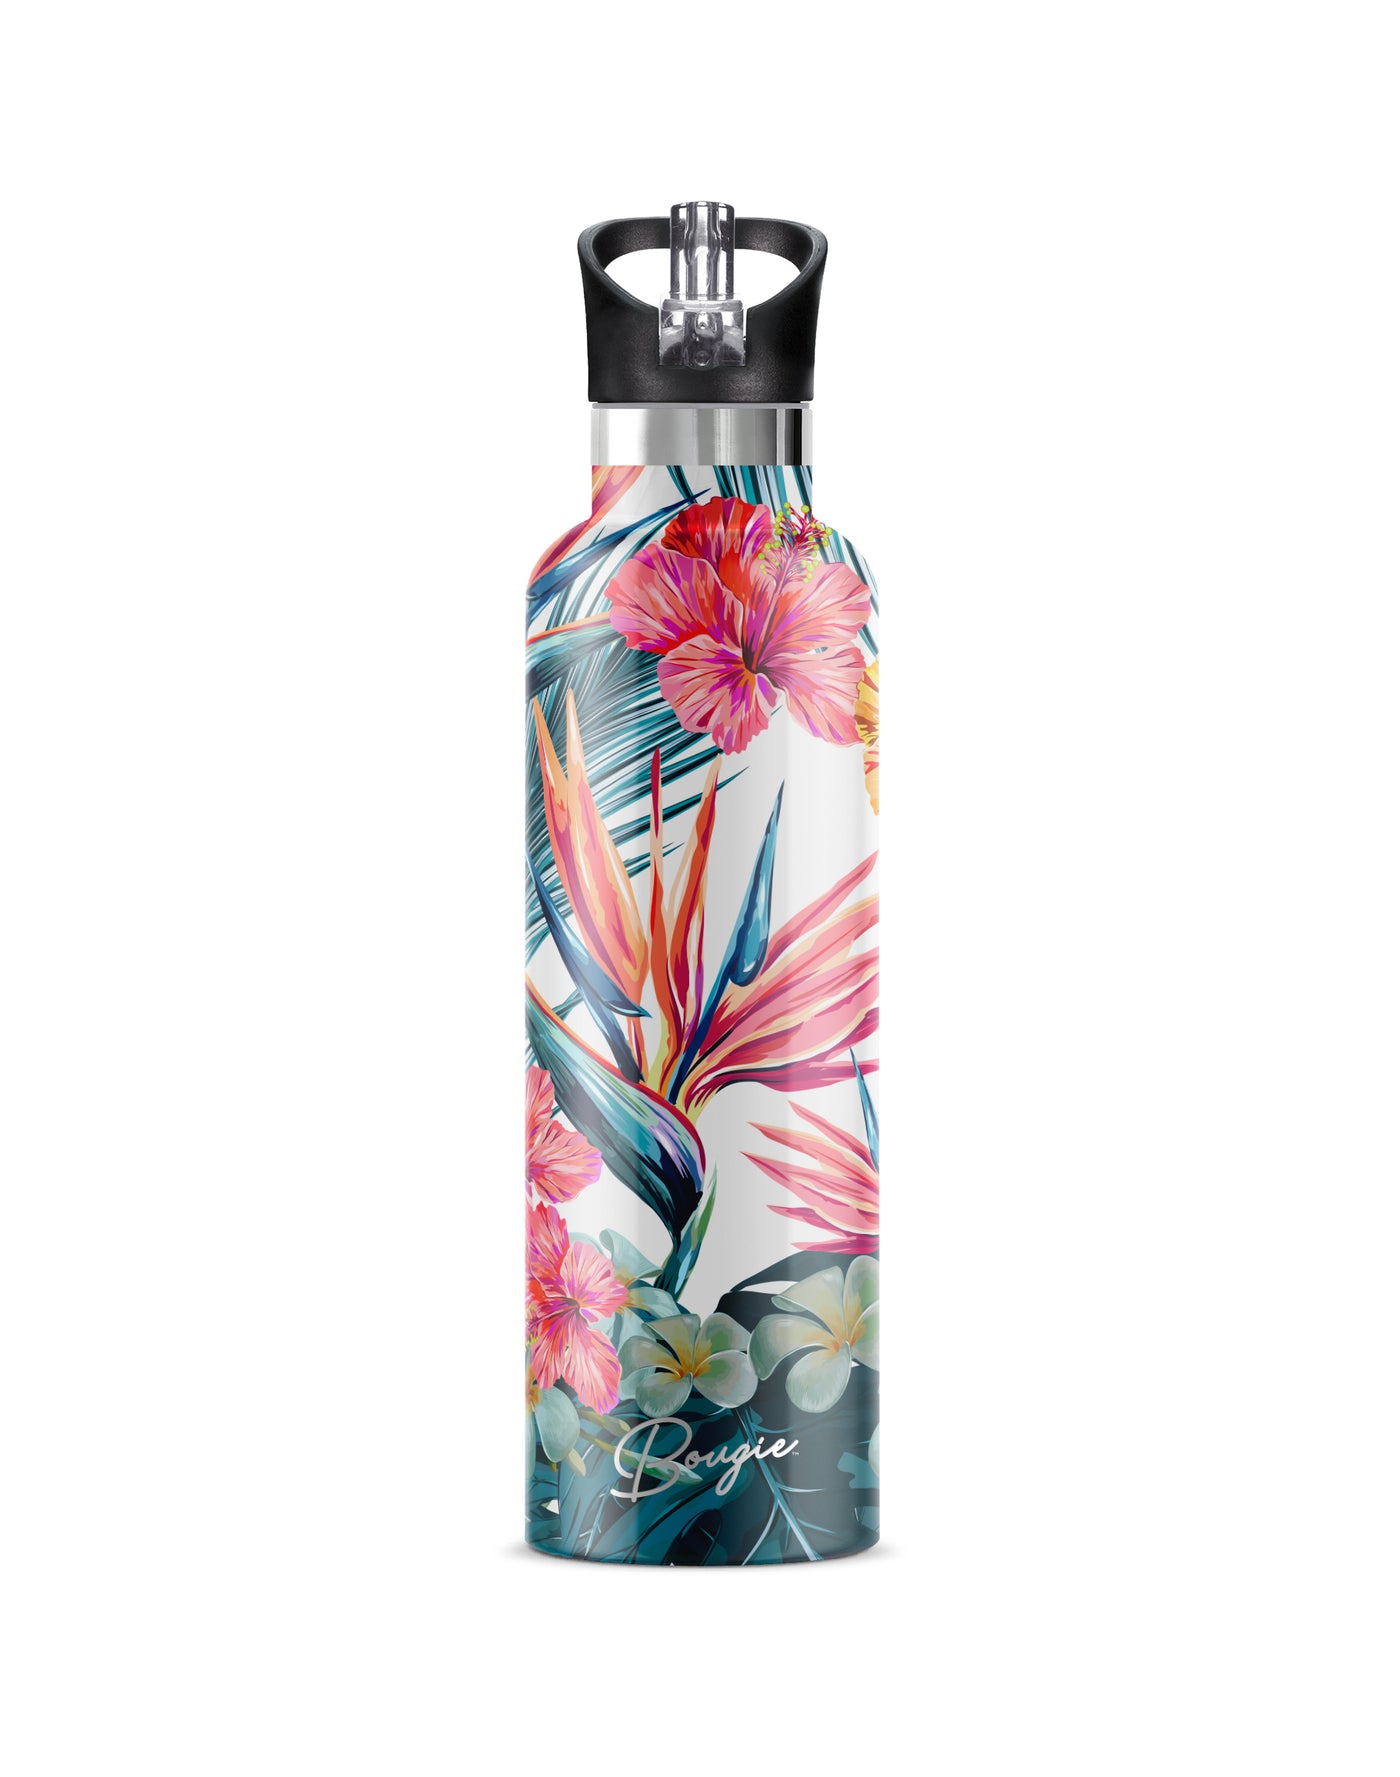 25 oz Insulated Flip'n'Sip Bottle | Hibiscus Tropical Floral Exotic Fashionable Bottle